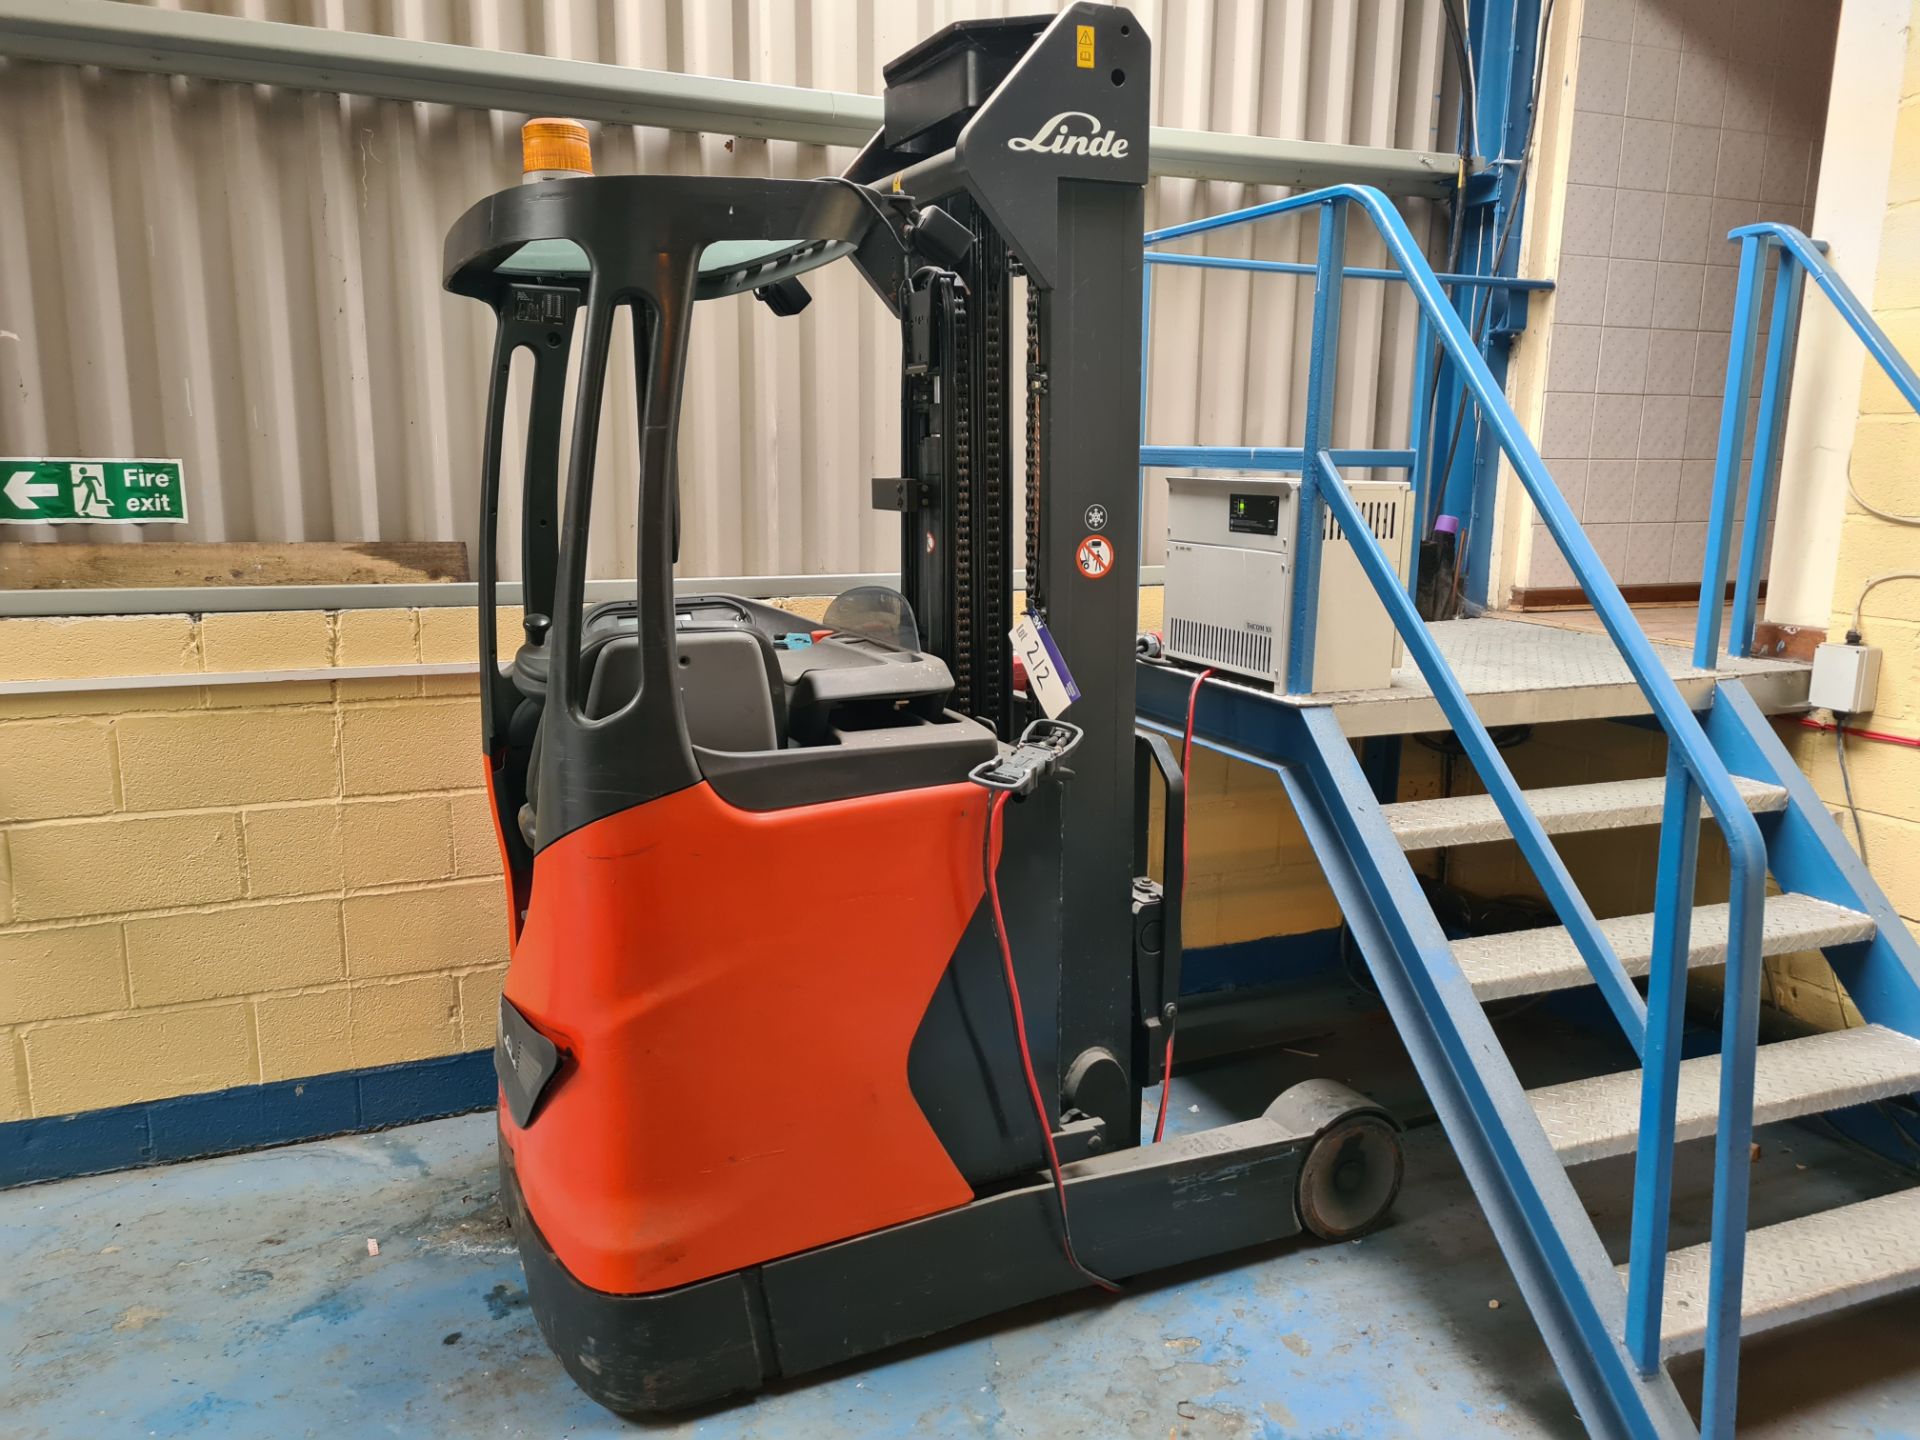 Linde R16N-1 Duplex Mast Ride on Electric Reach Truck, Yom 2013, S/N H21120D00851 c/w Charger